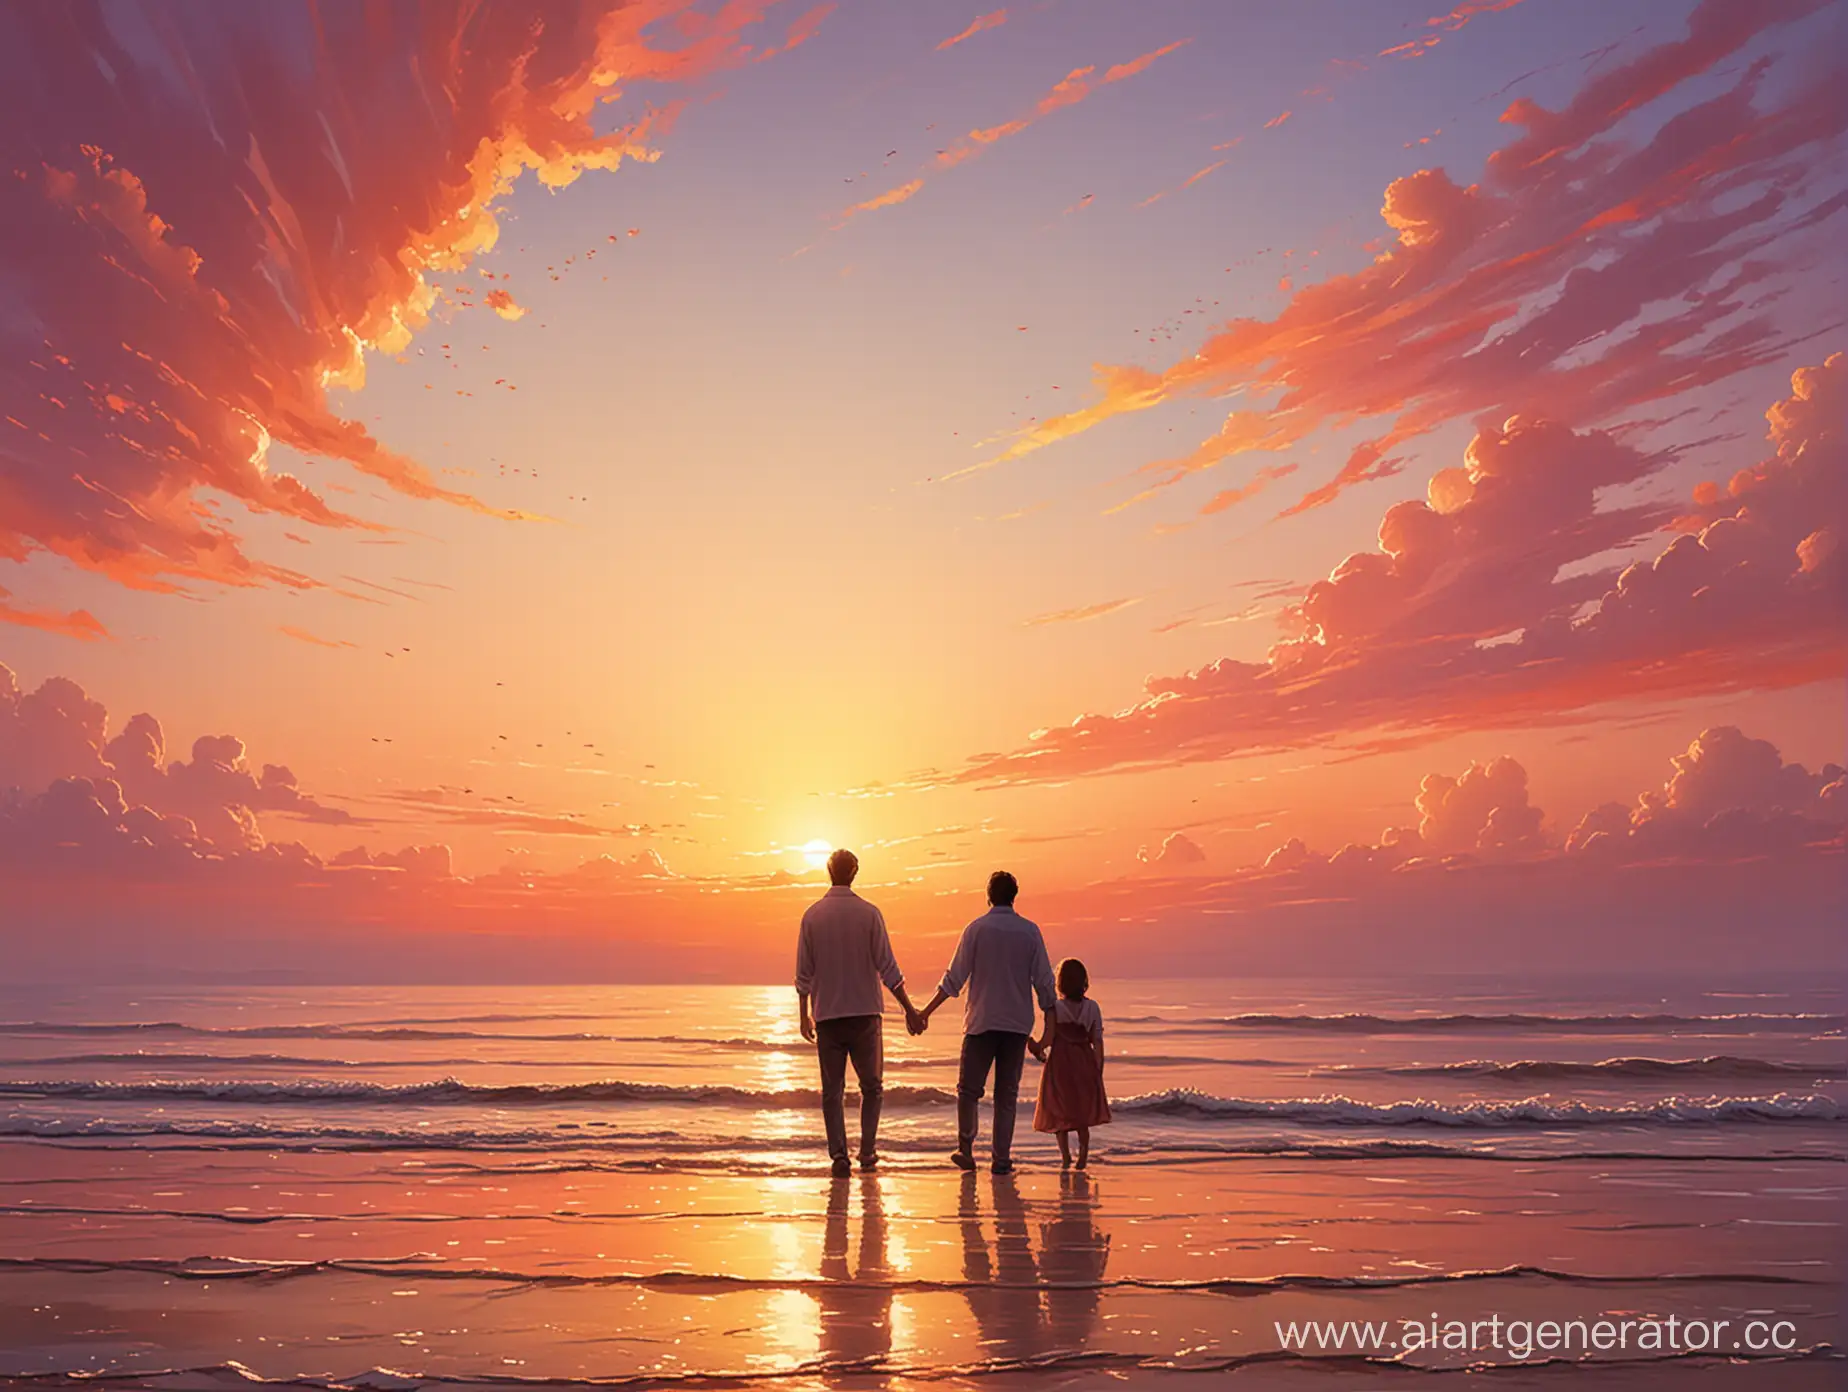 Sincere-Conversations-Love-and-Tenderness-Captured-in-a-Serene-Sunset-Scene